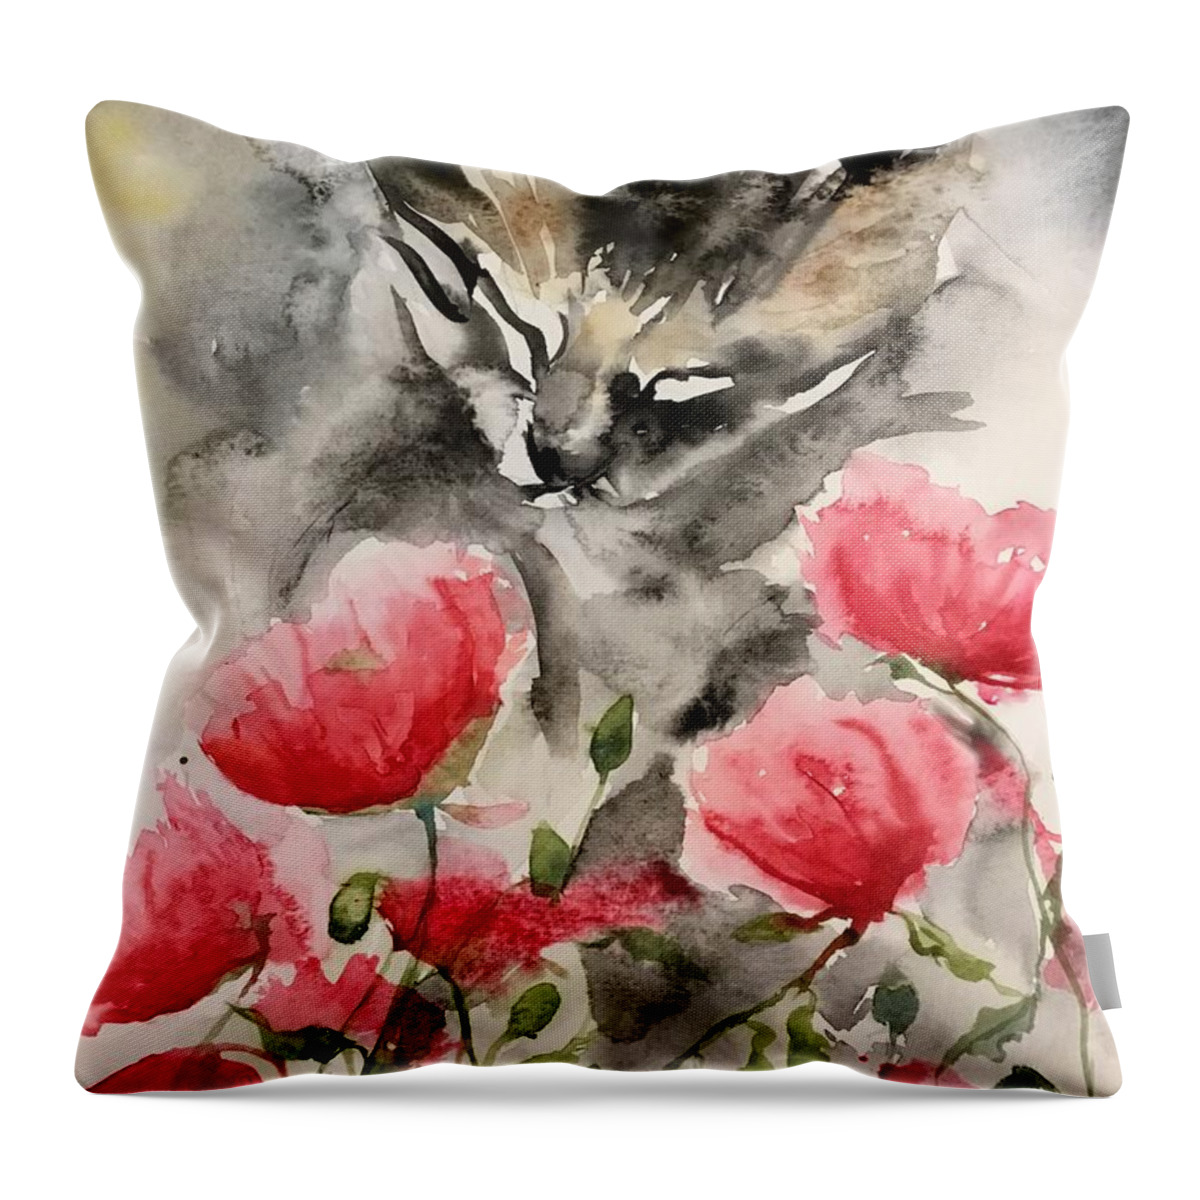 1462019 Throw Pillow featuring the painting 1462019 by Han in Huang wong